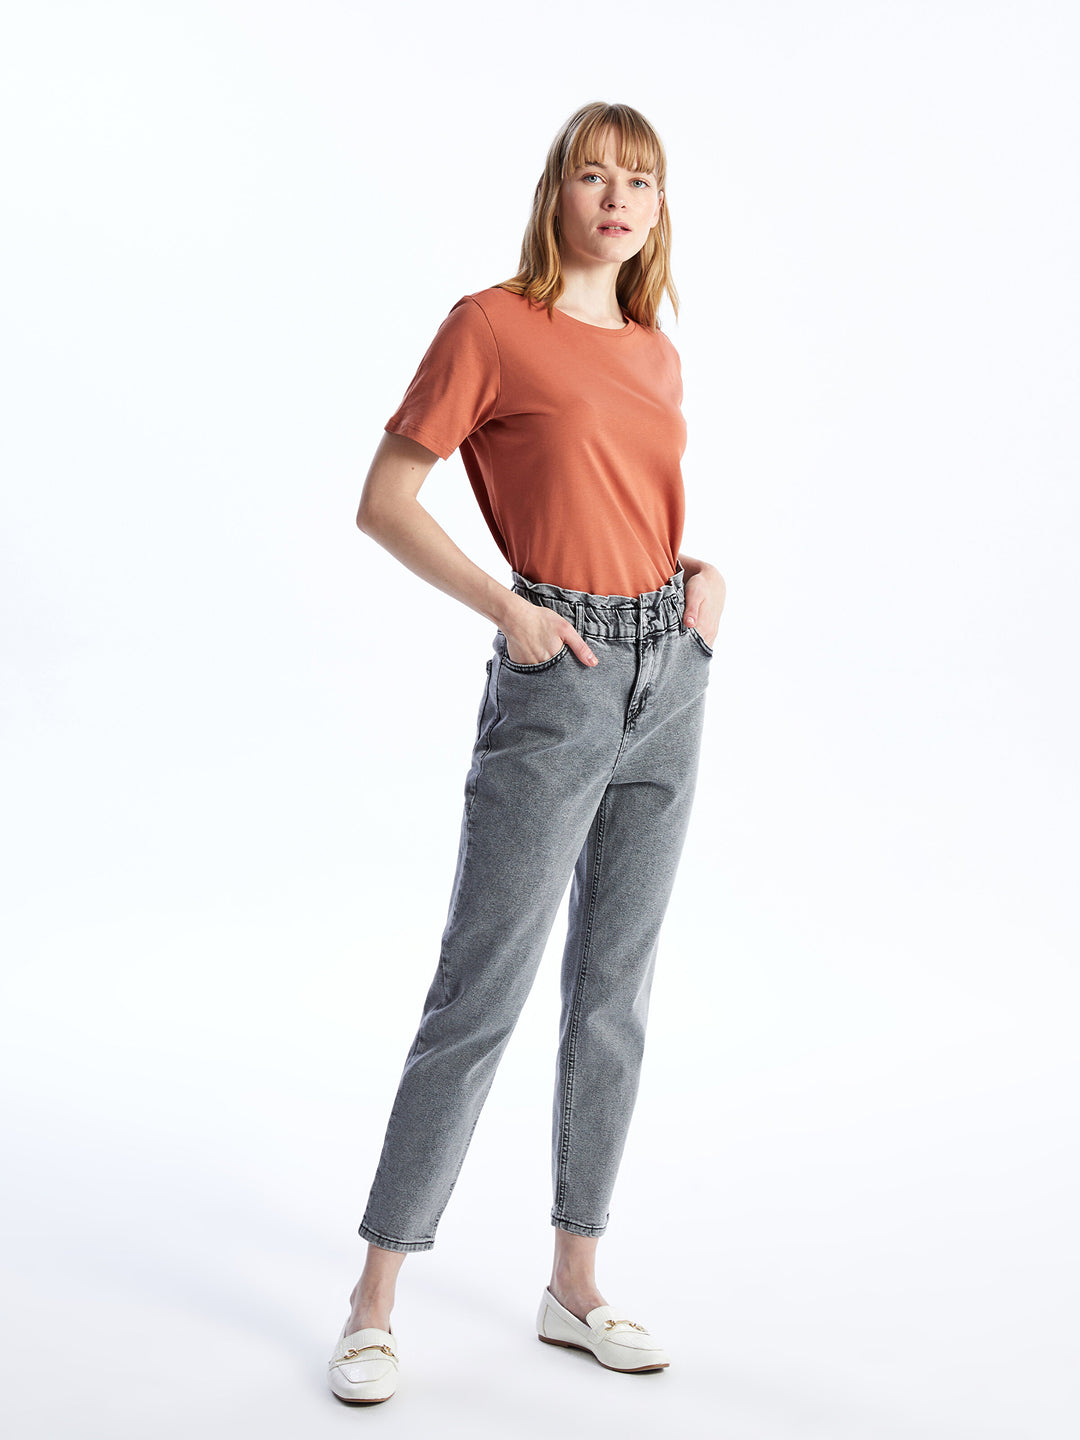 Slim Fit Women Jean Trousers With Elastic Waist